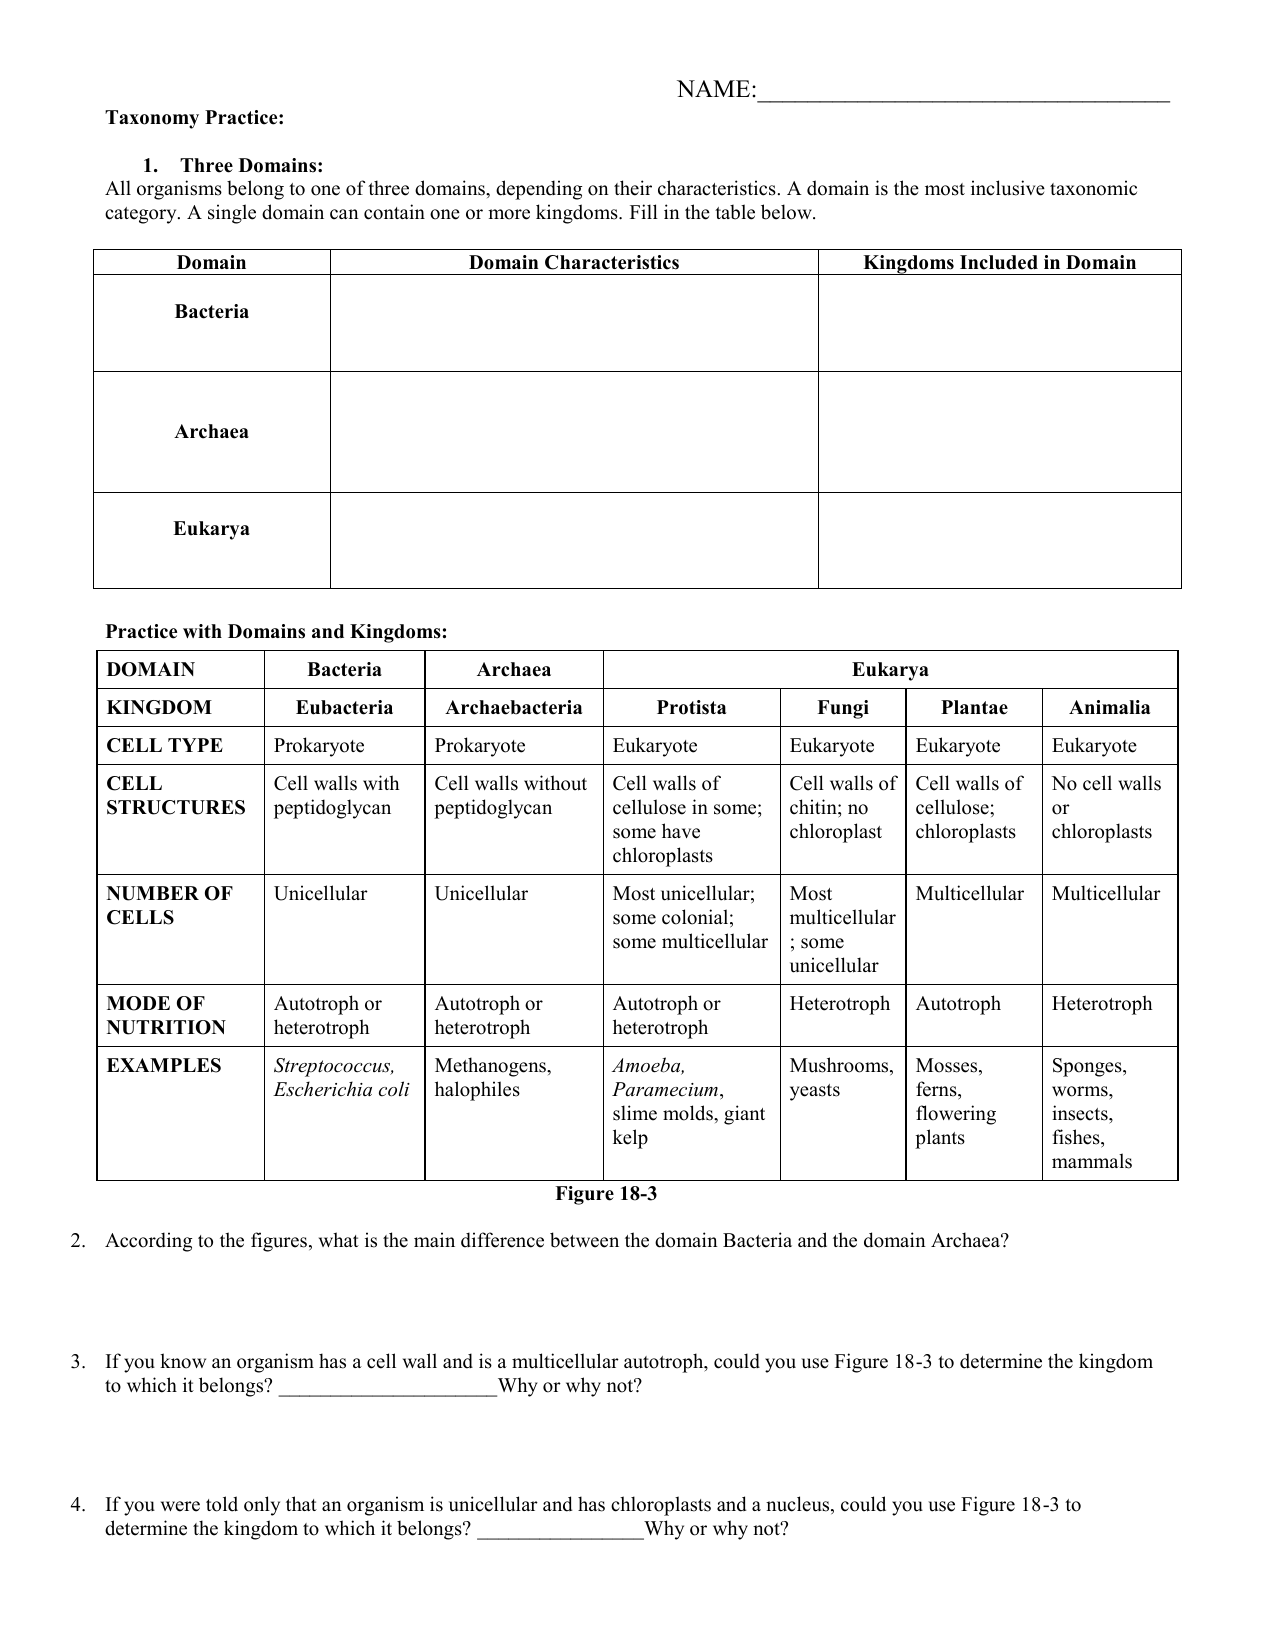 Domains Kingdoms and Classification 11-11 Inside Domains And Kingdoms Worksheet